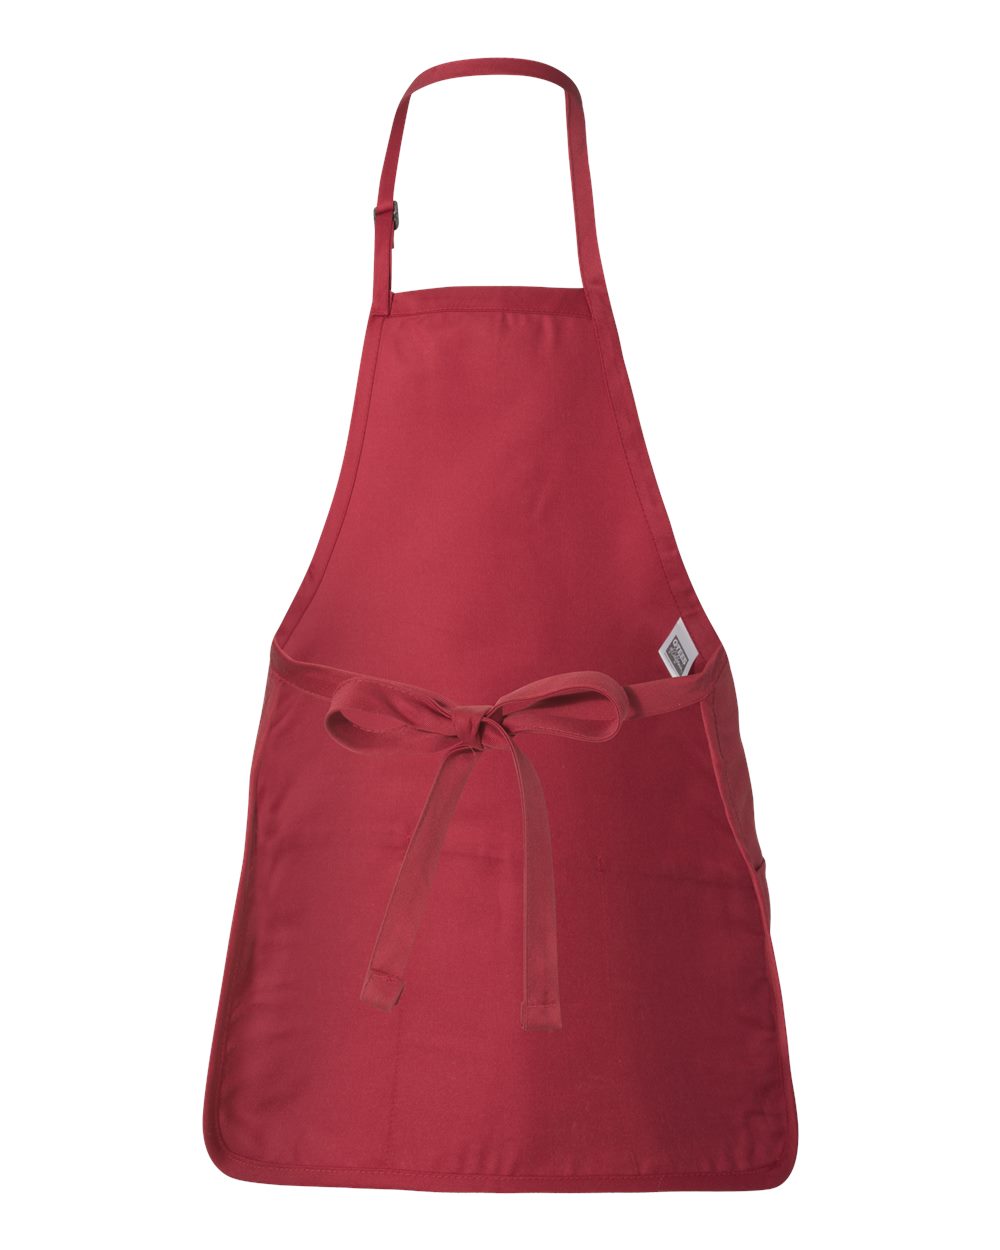 maryland-gifts-maryland-crab-apron-red